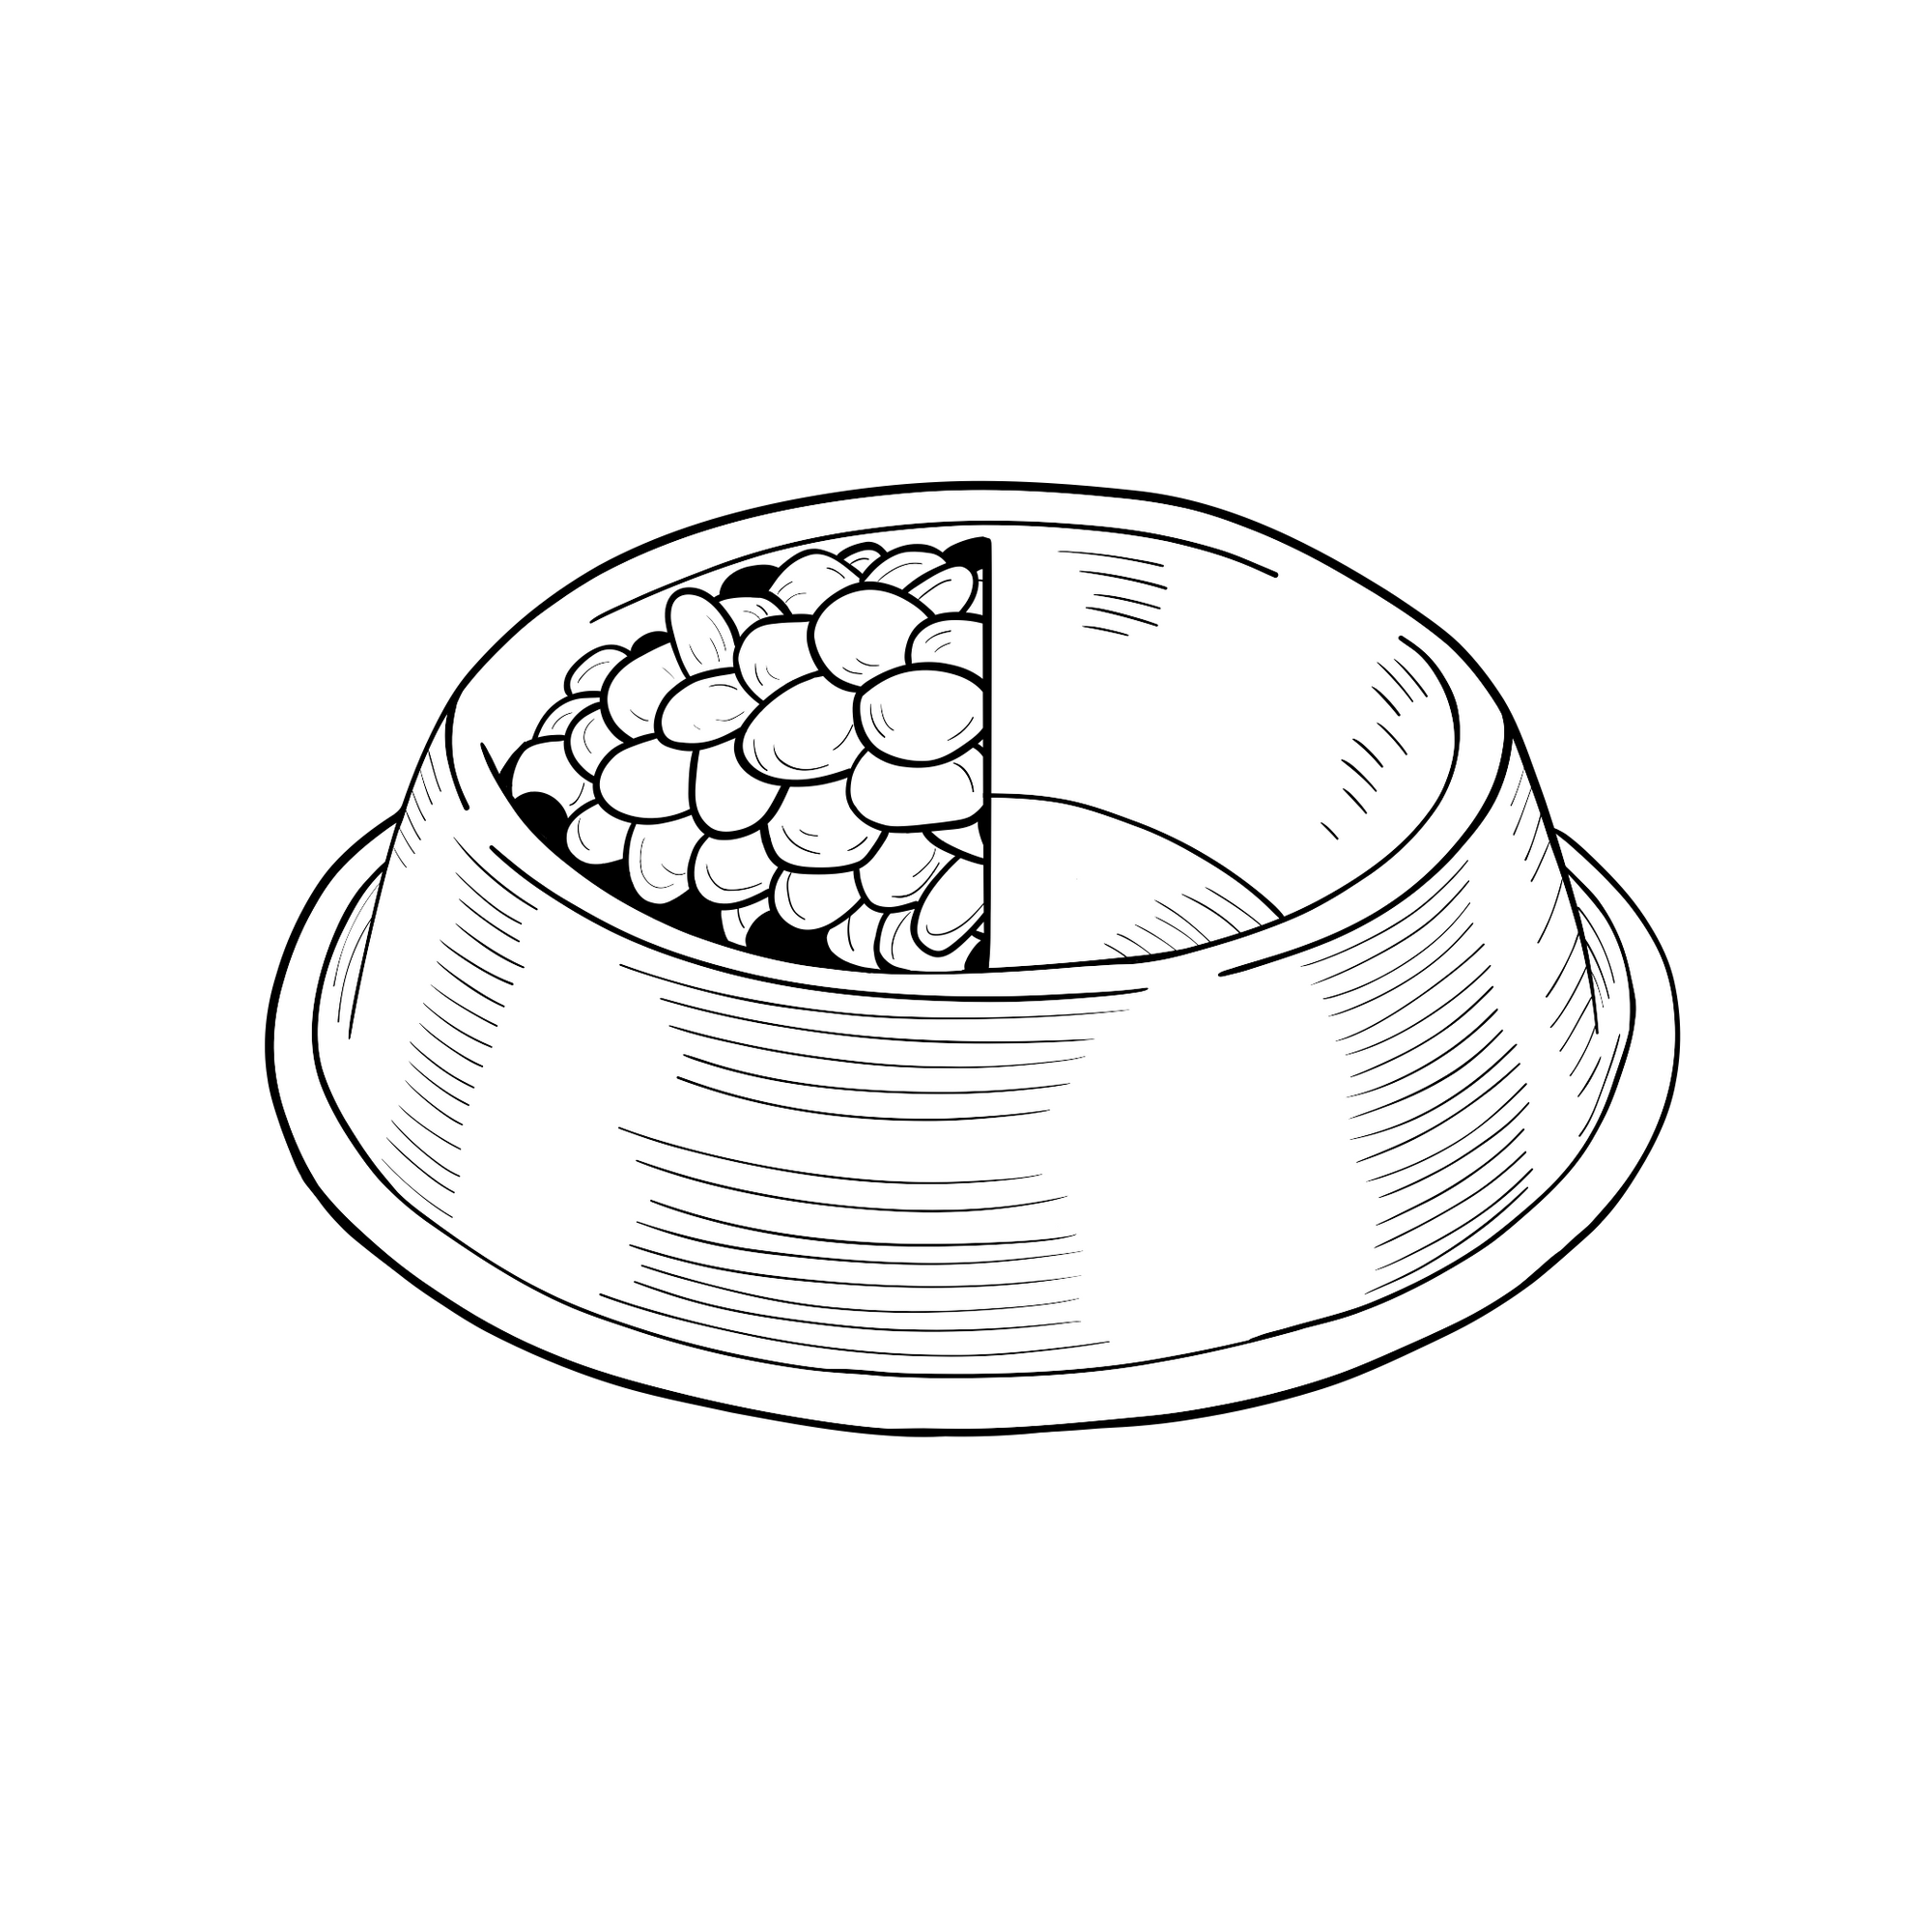 Line drawing of a bowl of food, filled half of the way with kibble.